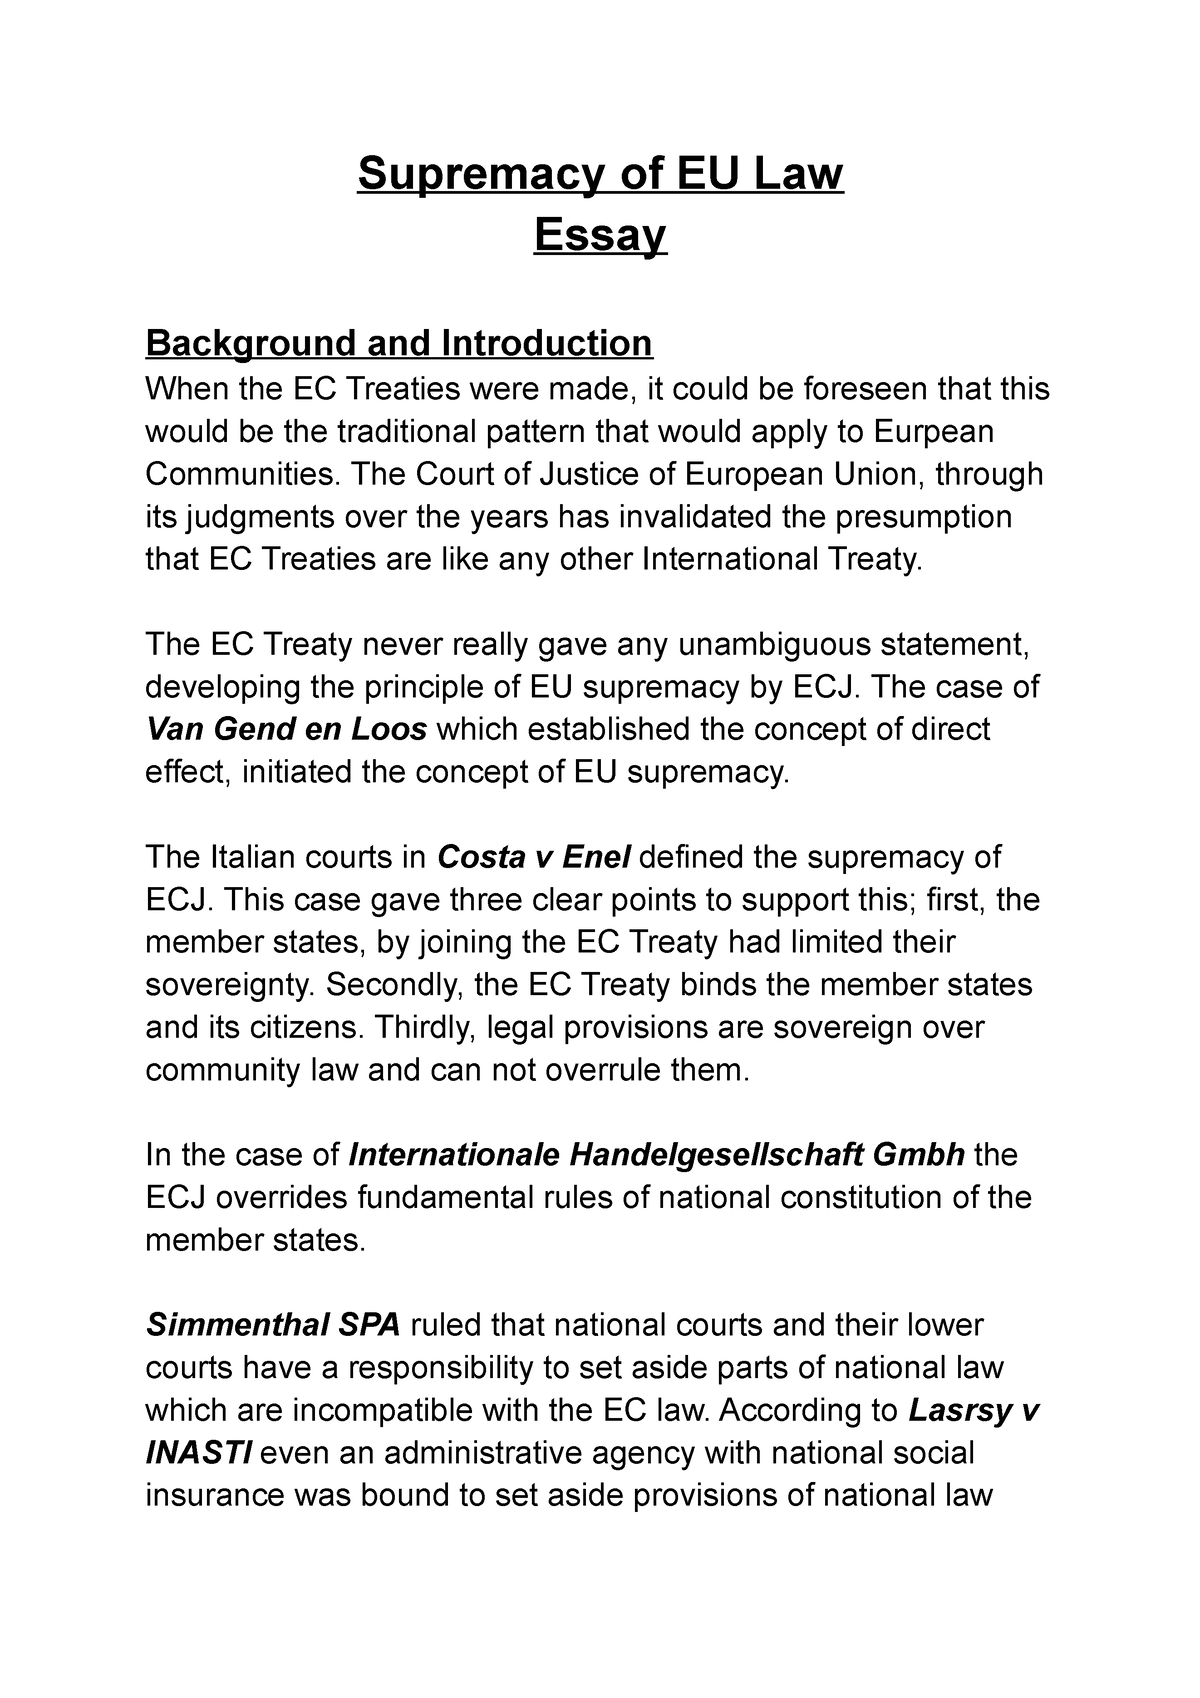 direct effect and supremacy eu law essay